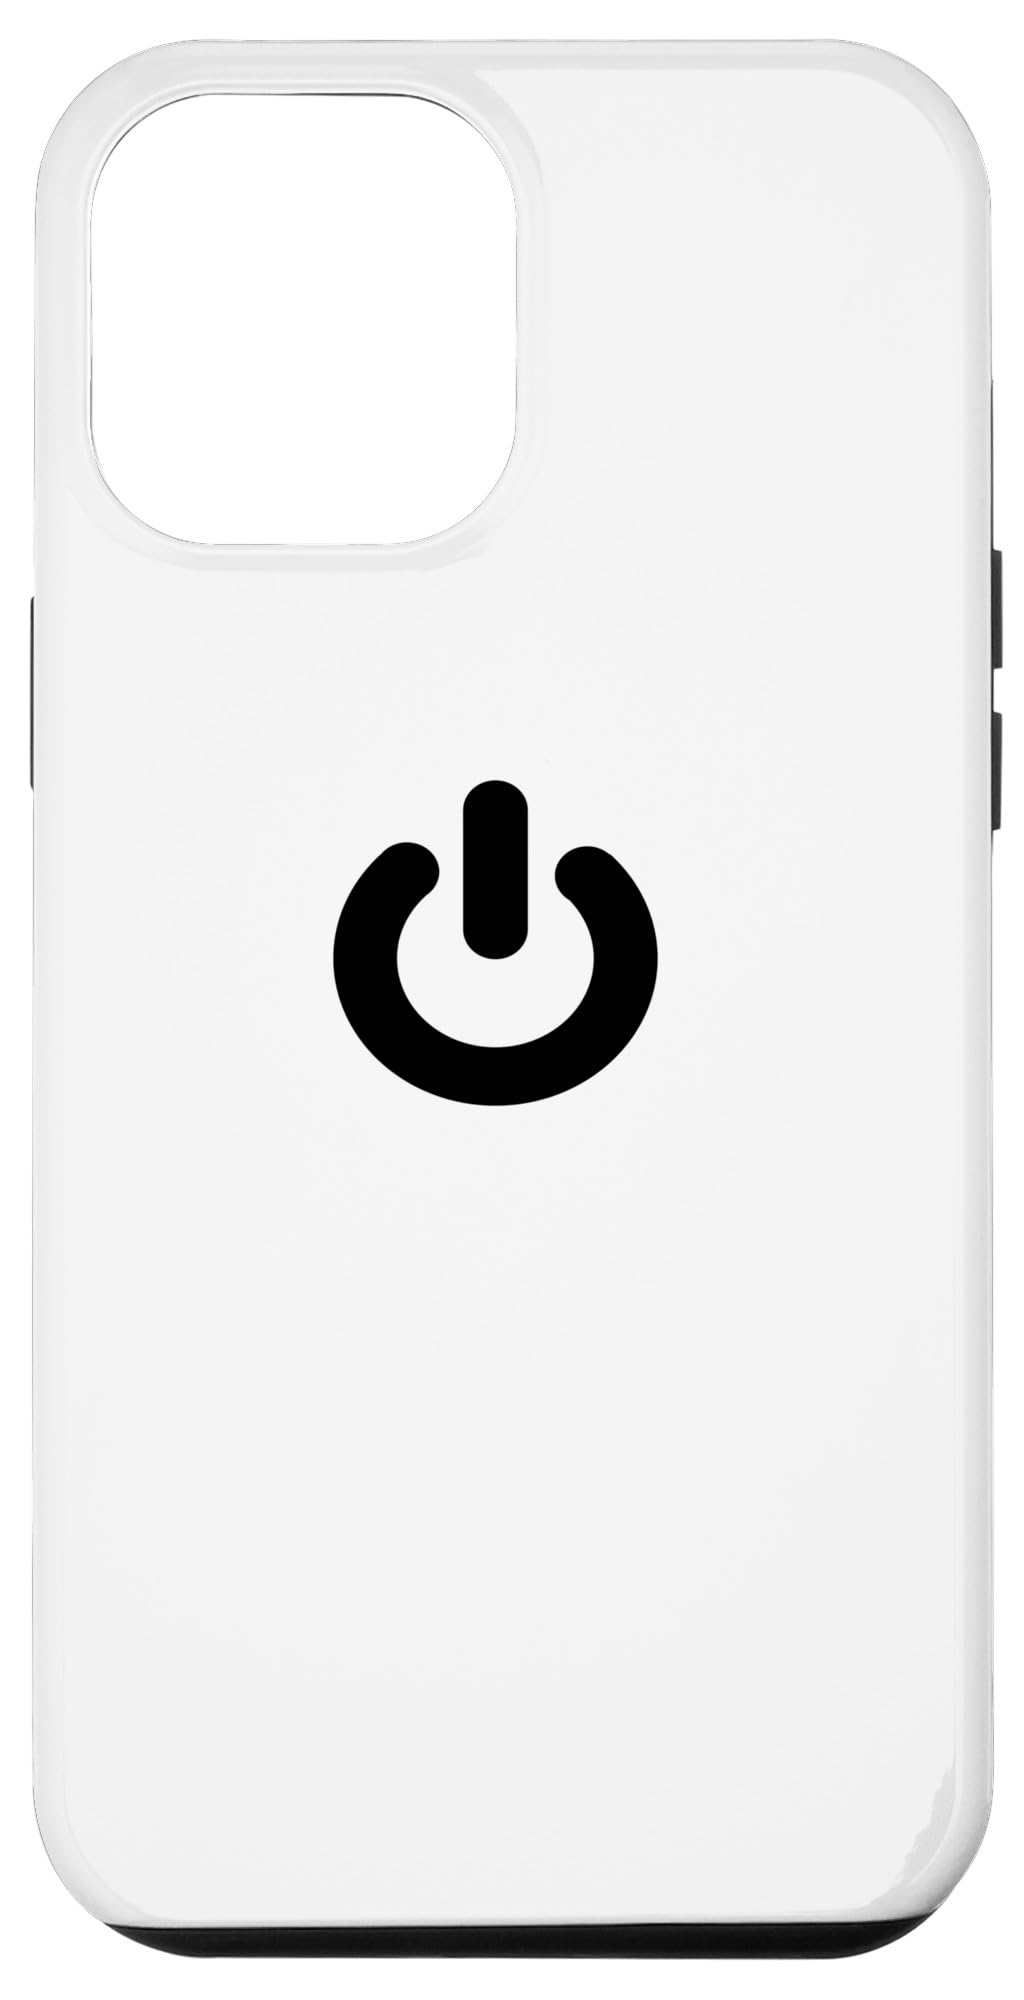 iPhone with a power button symbol